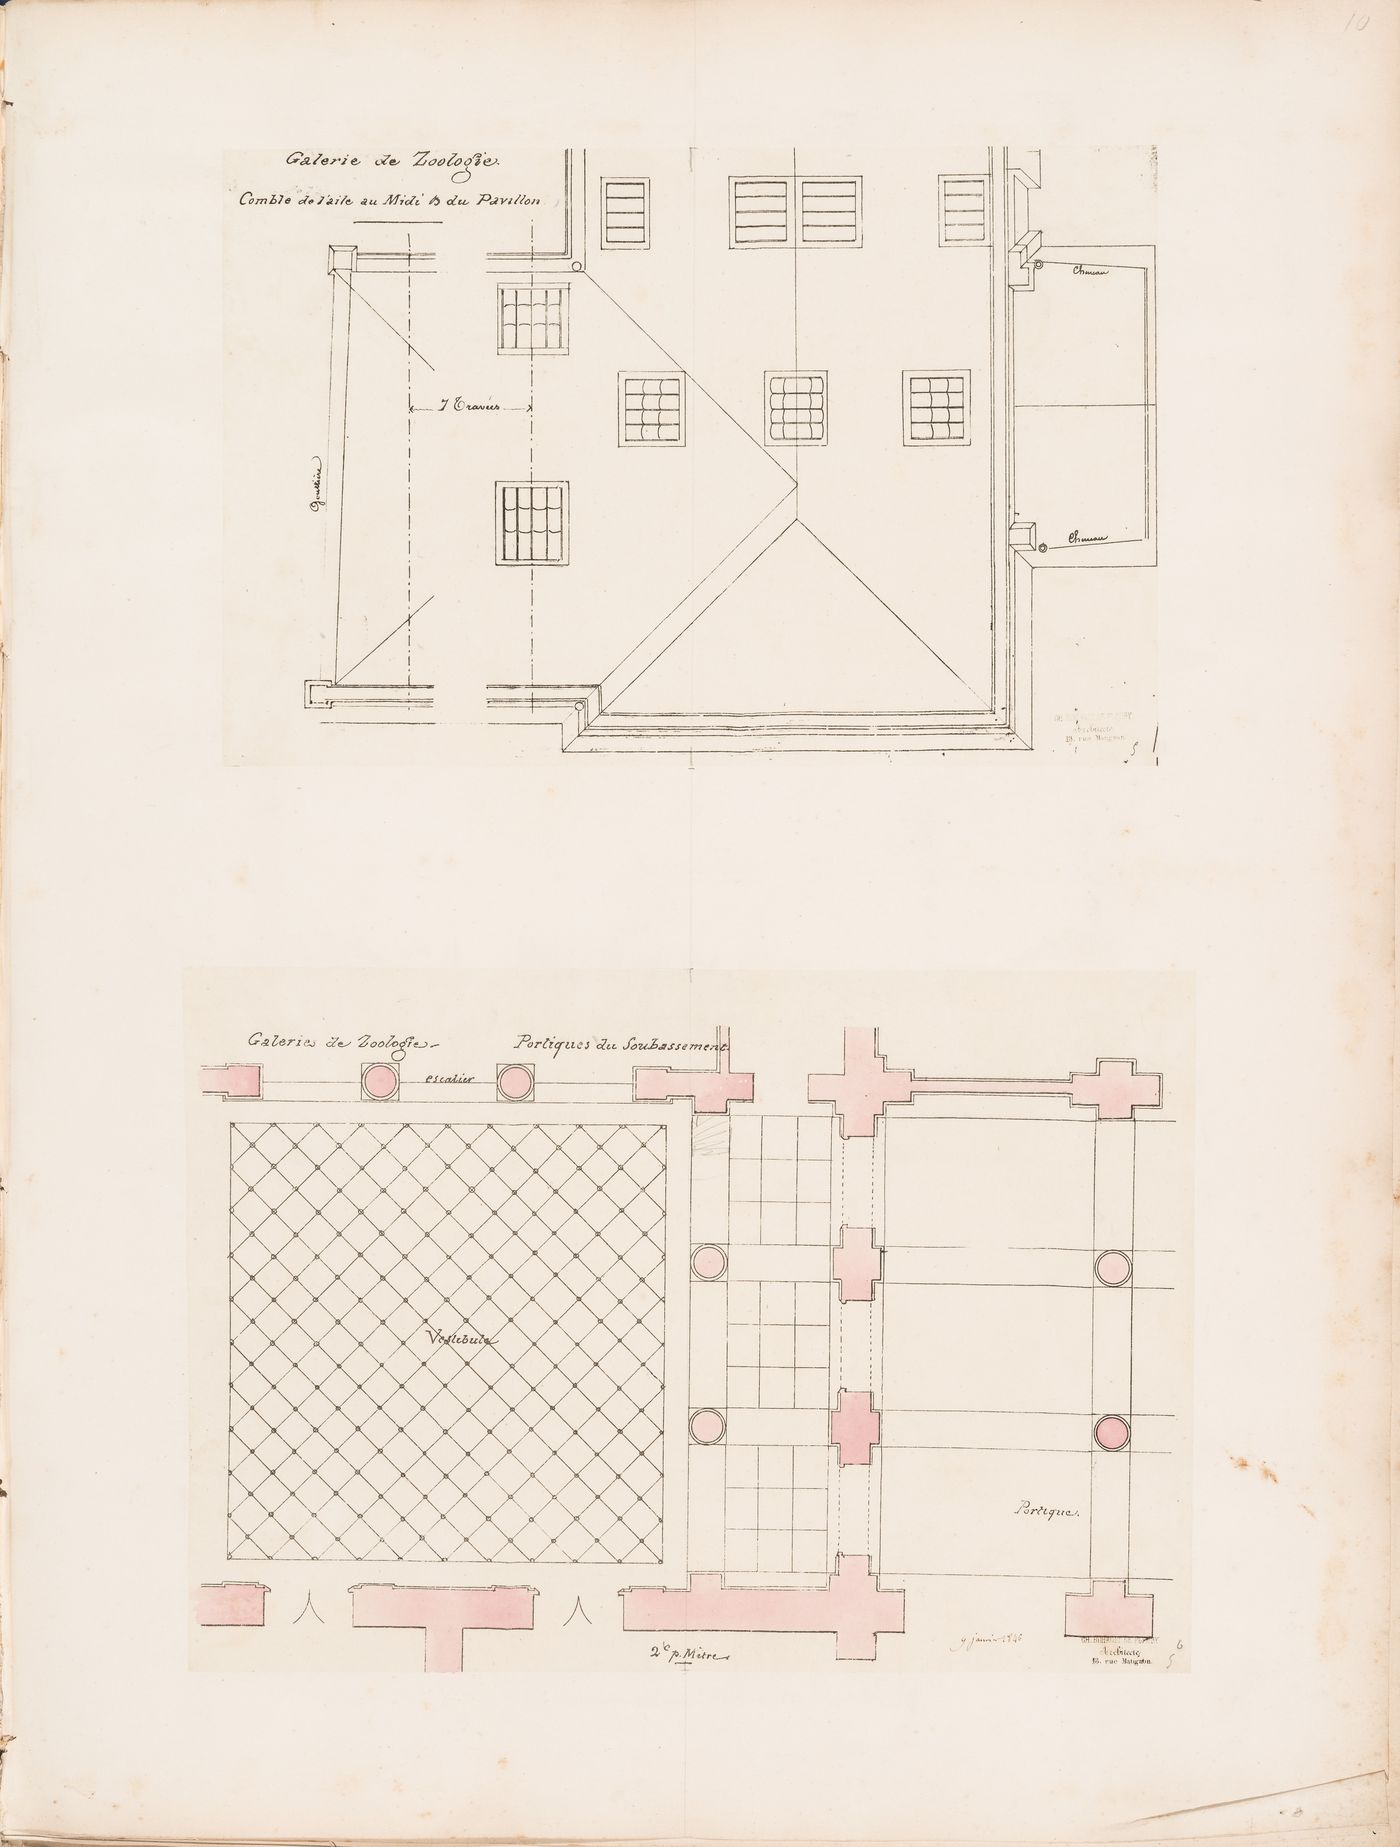 Project for a Galerie de zoologie, 1846: Roof plan for the south wing and plan for the "soubassement" for the portico and vestibule